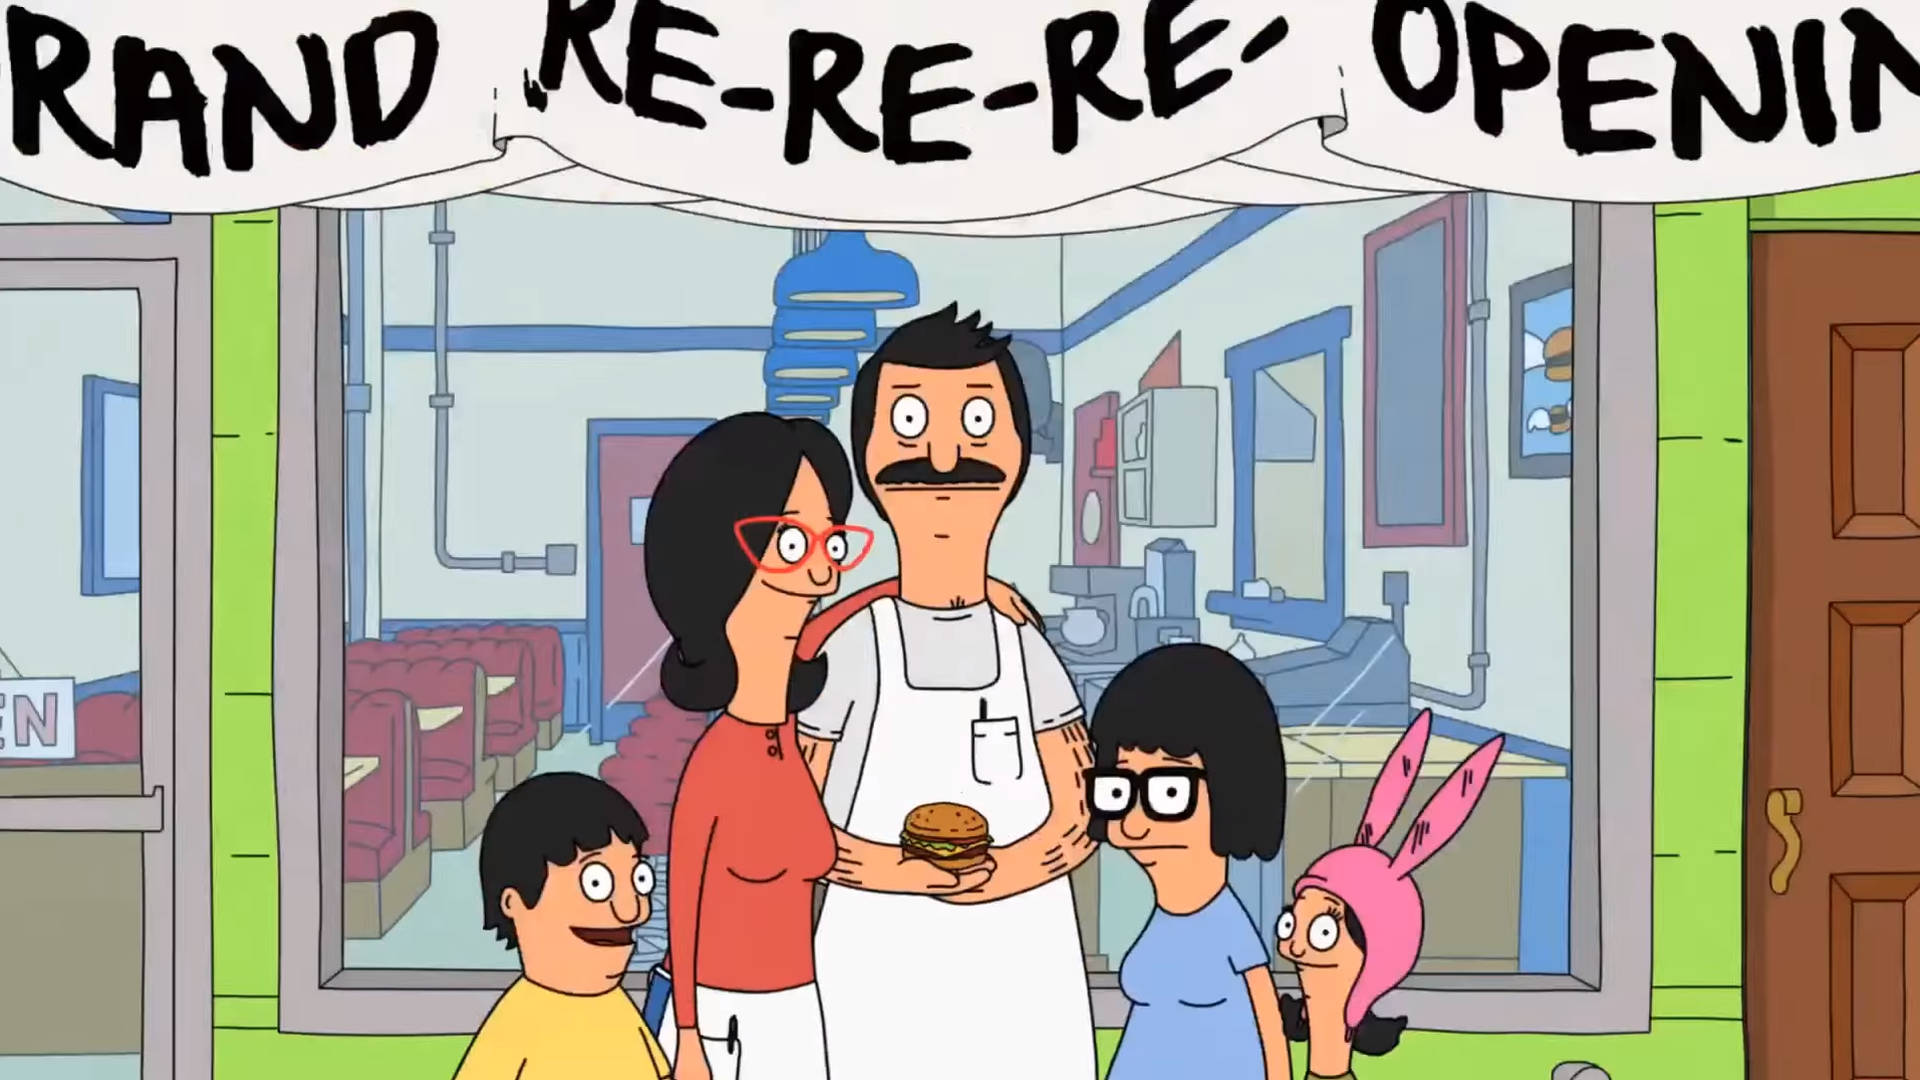 Bobs Burgers Grand Re-re-re-opening Background